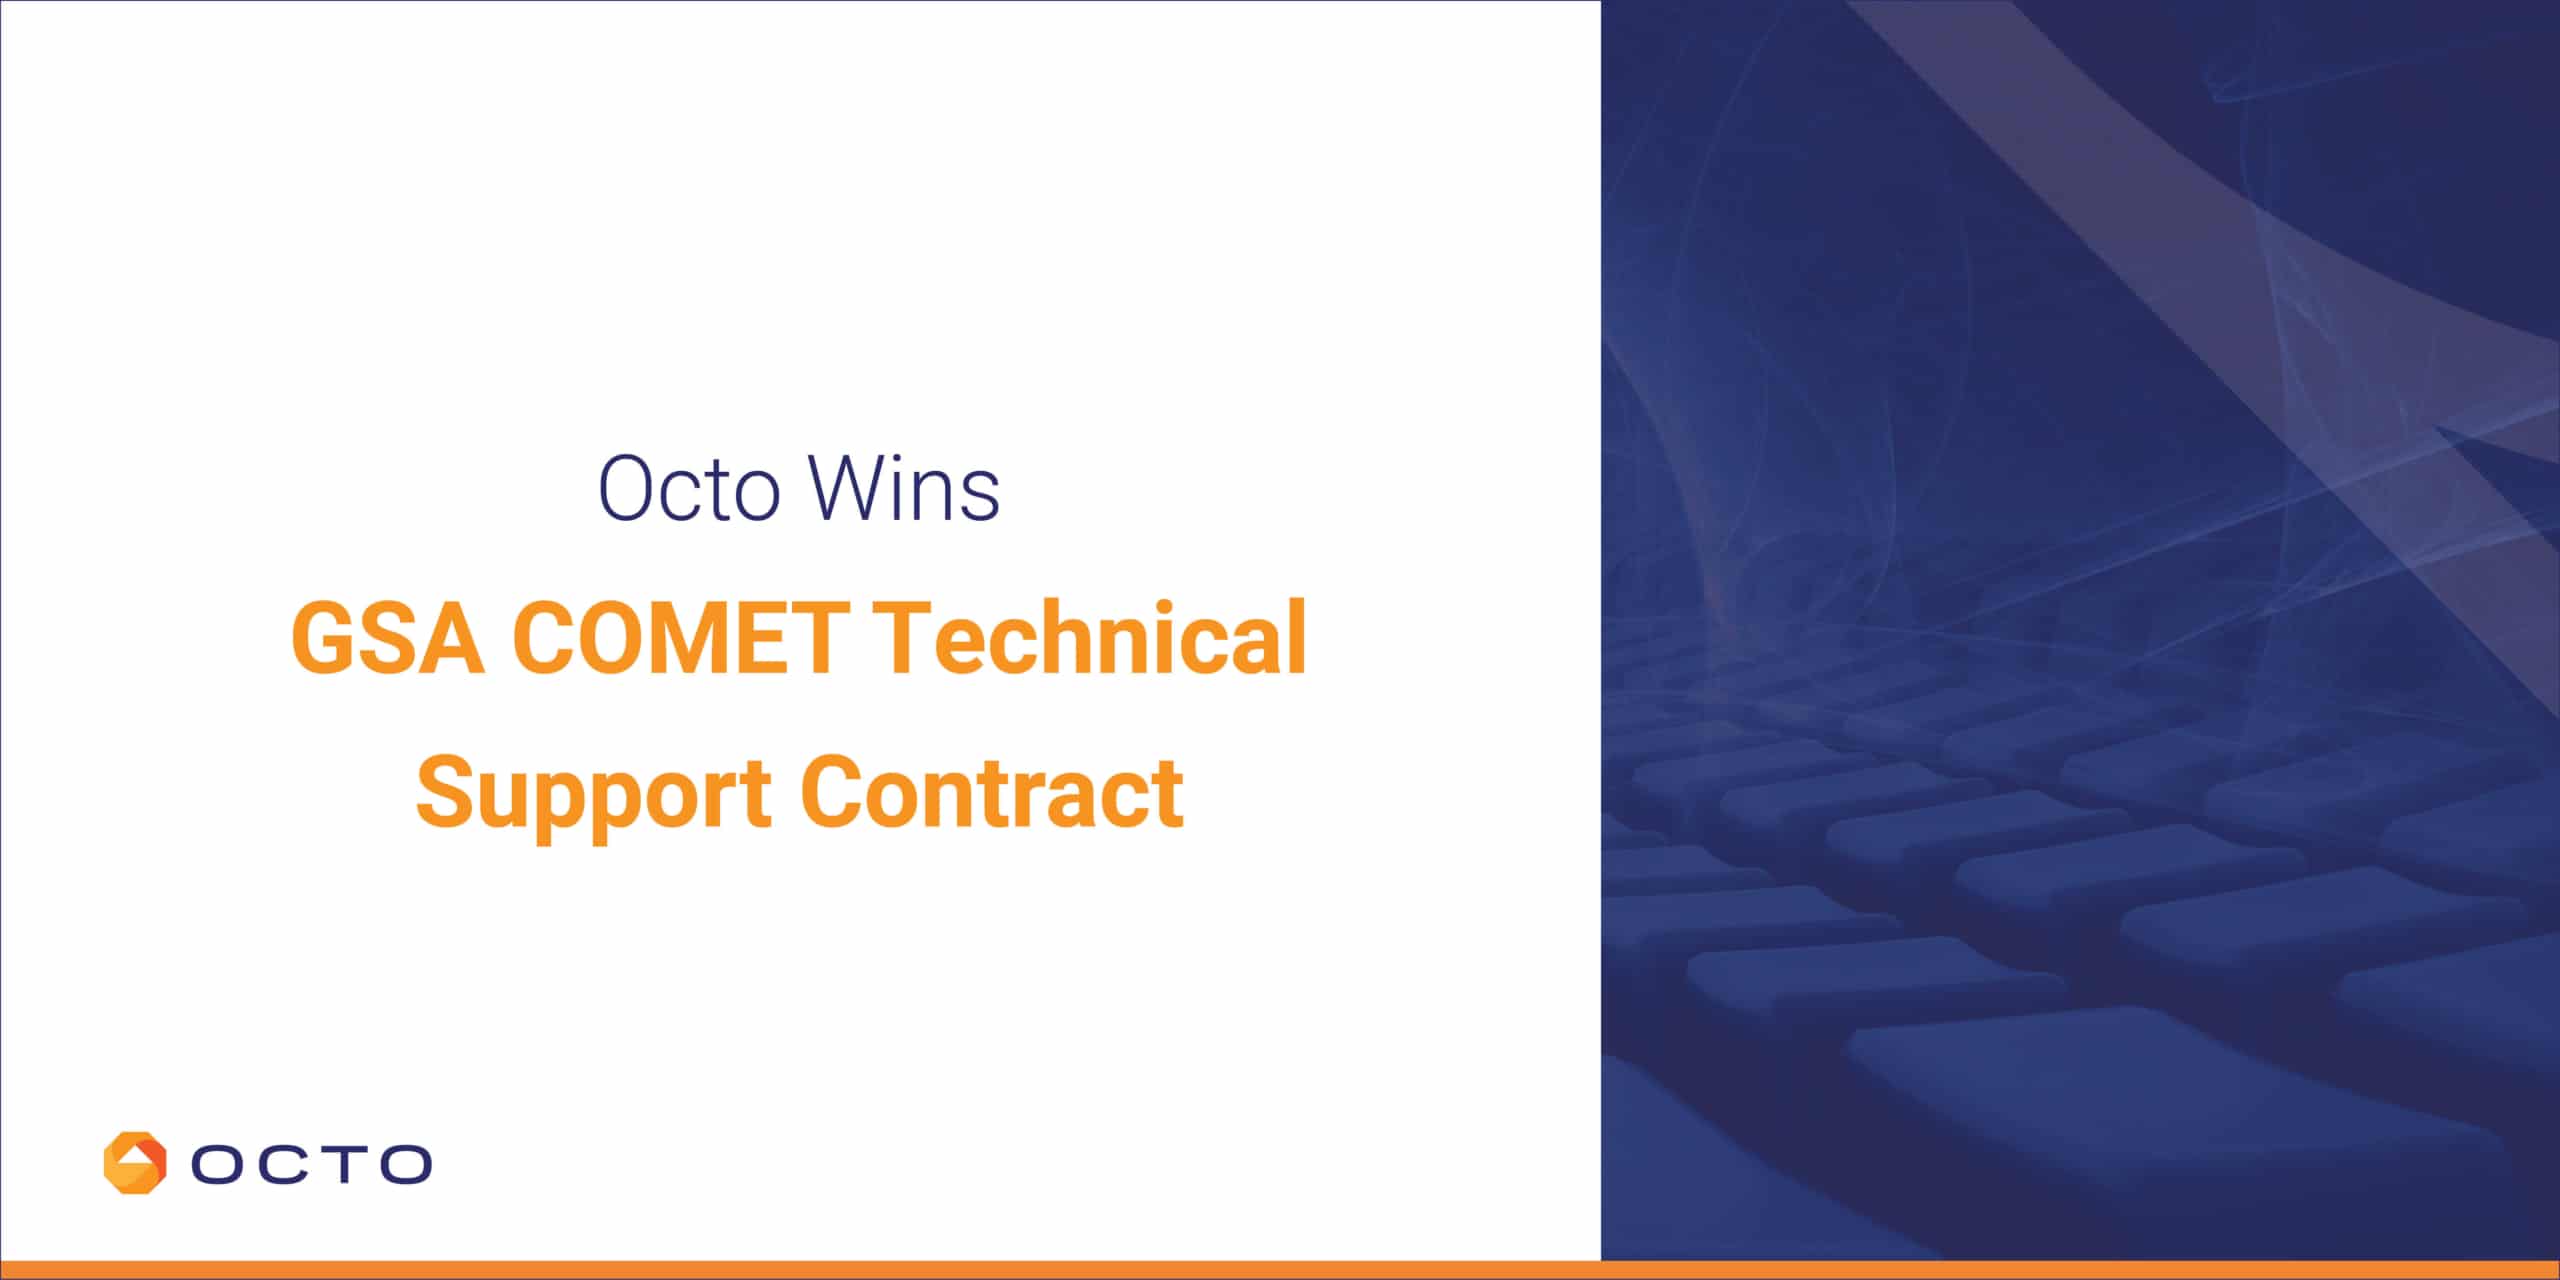 Octo Wins GSA COMET Technical Support Contract